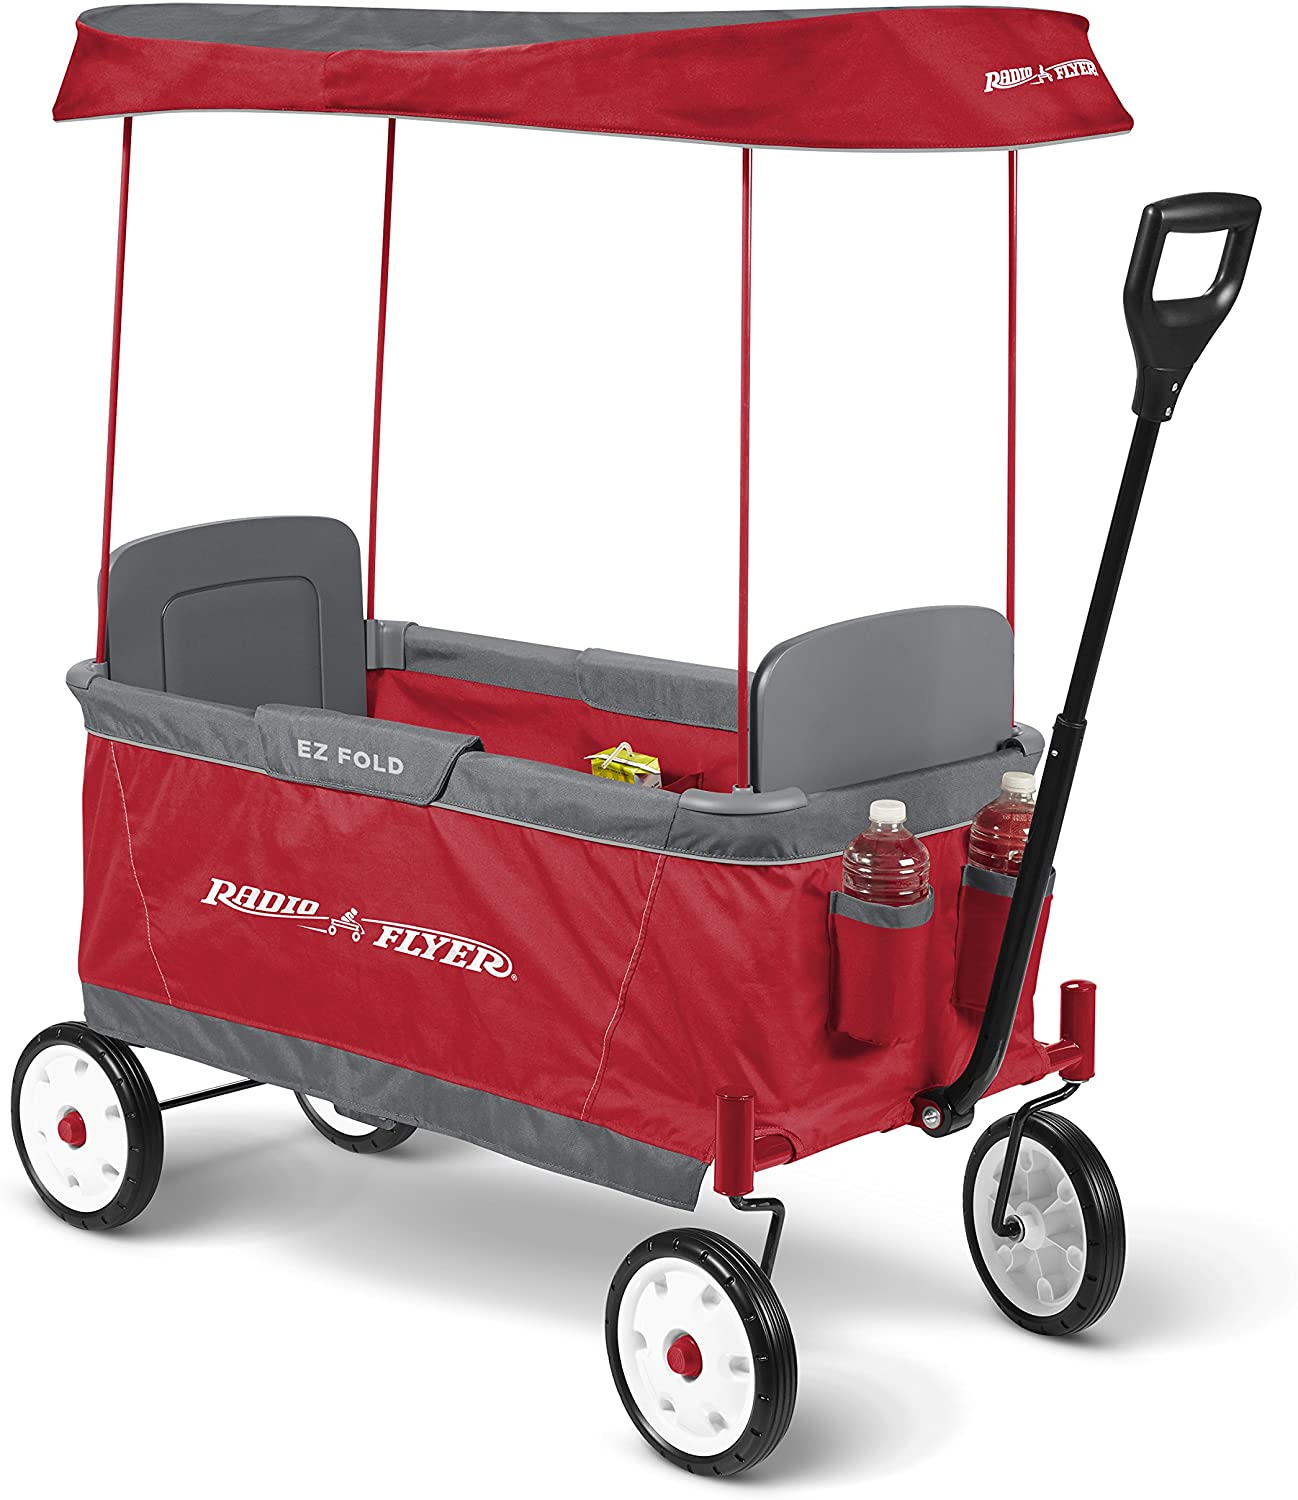 wagons for kids